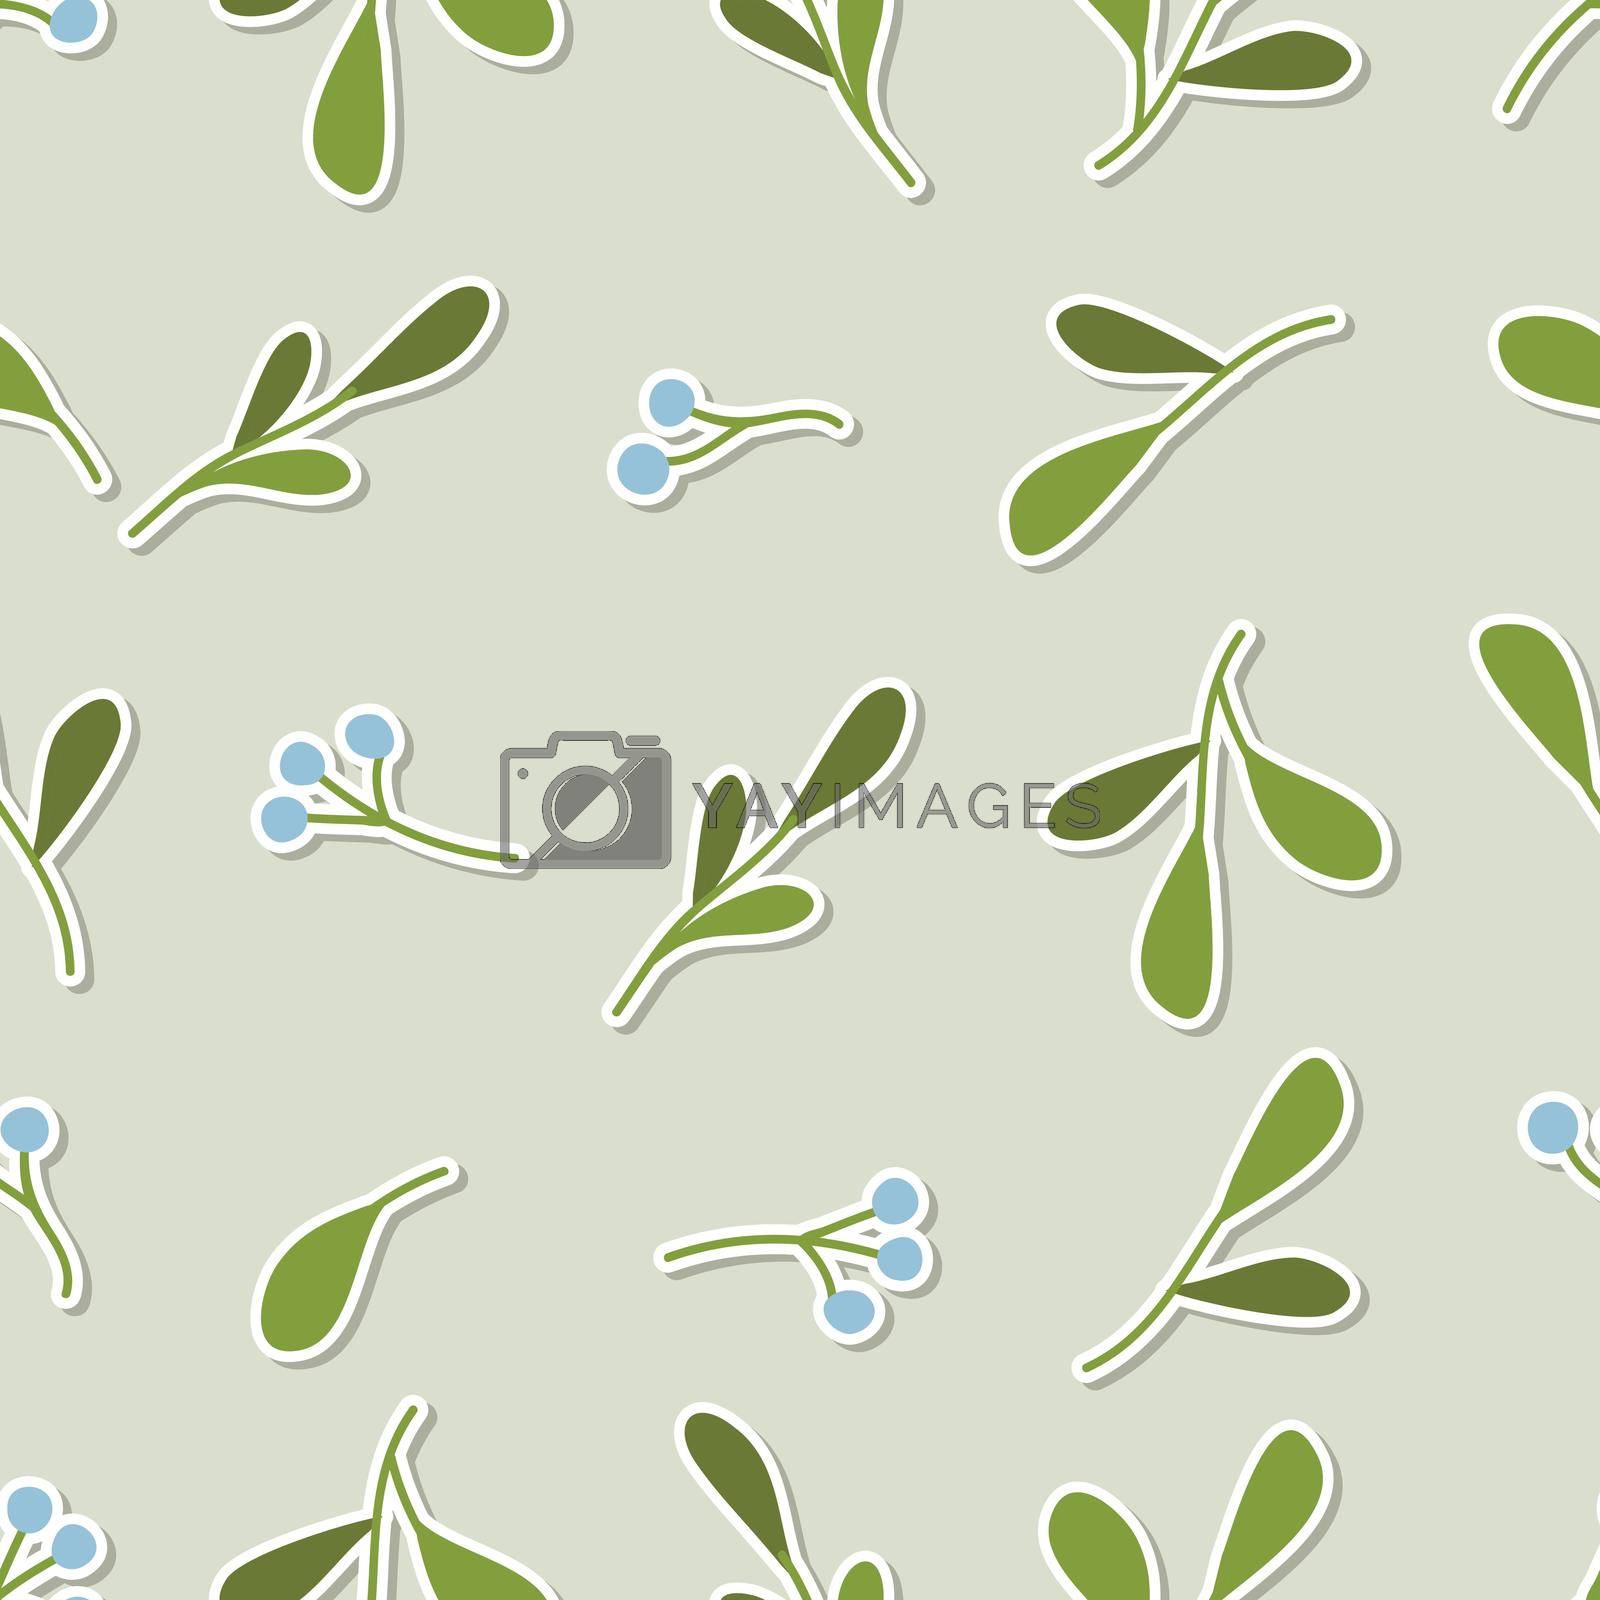 Royalty free image of Seamless floral element cartoon pattern by valueinvestor